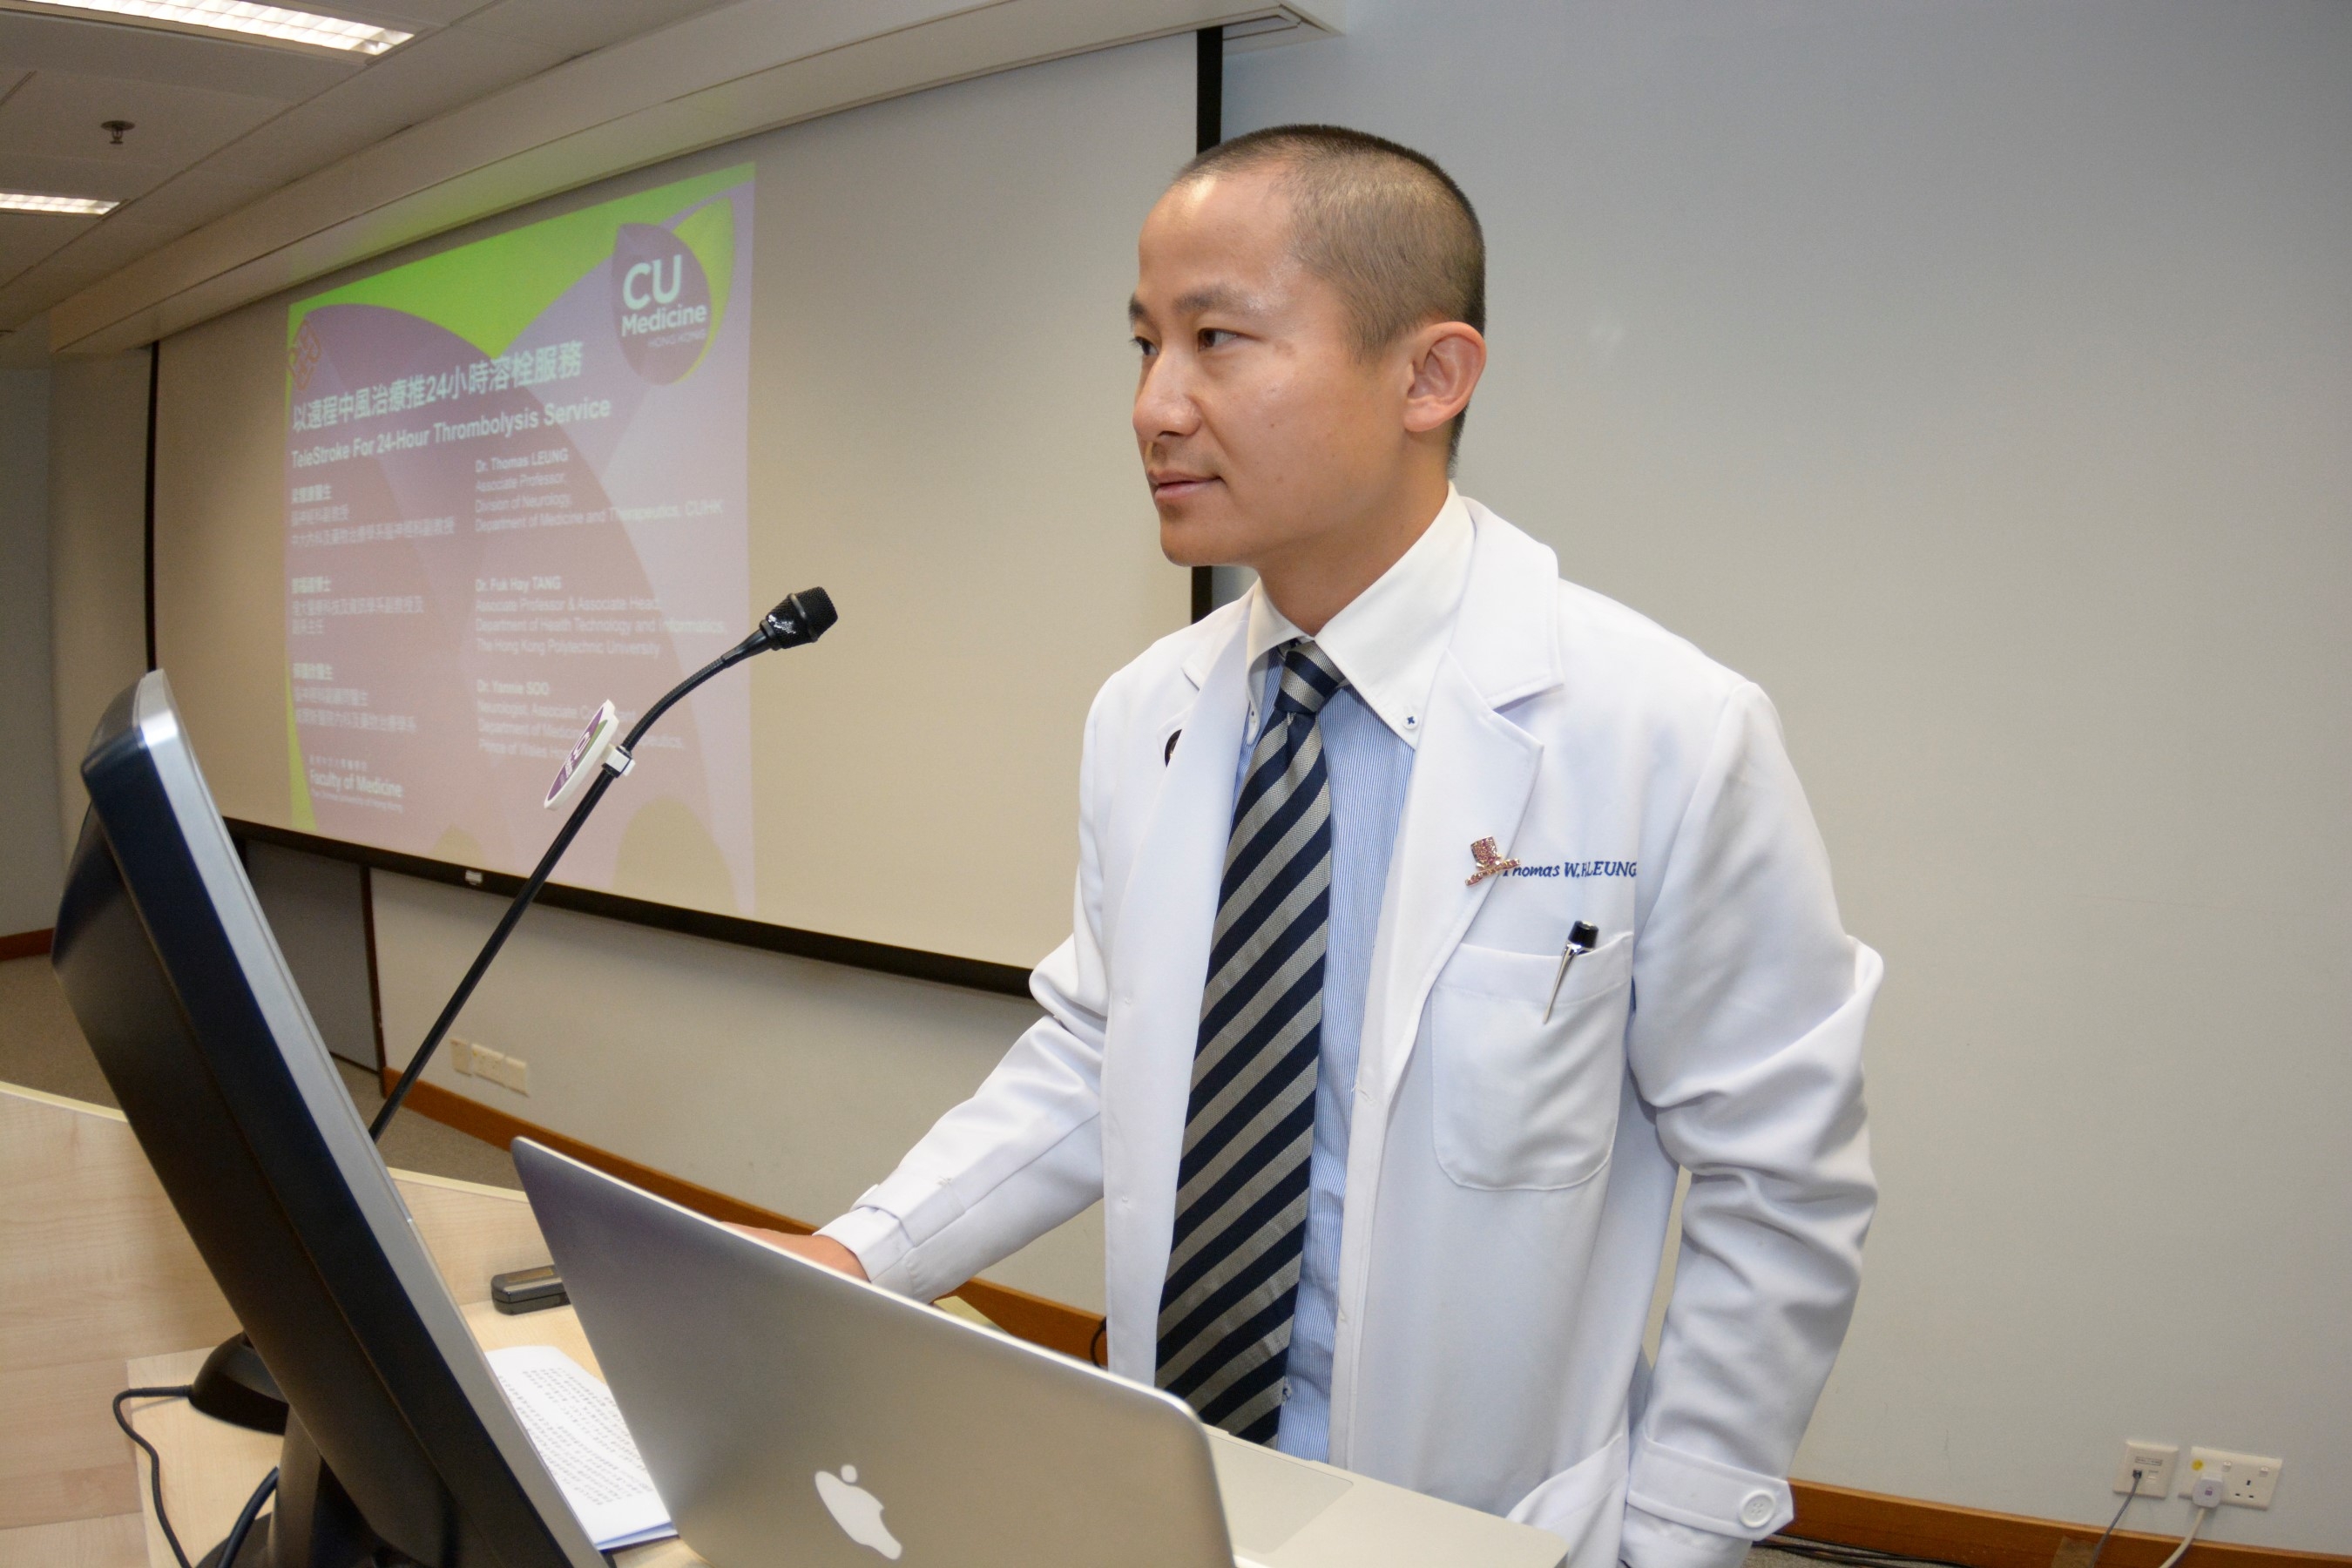 Dr. Thomas Leung, CUHK states that the telestorke system relieves the shortage of neurologists and grealty improves the health care service for stroke patients.